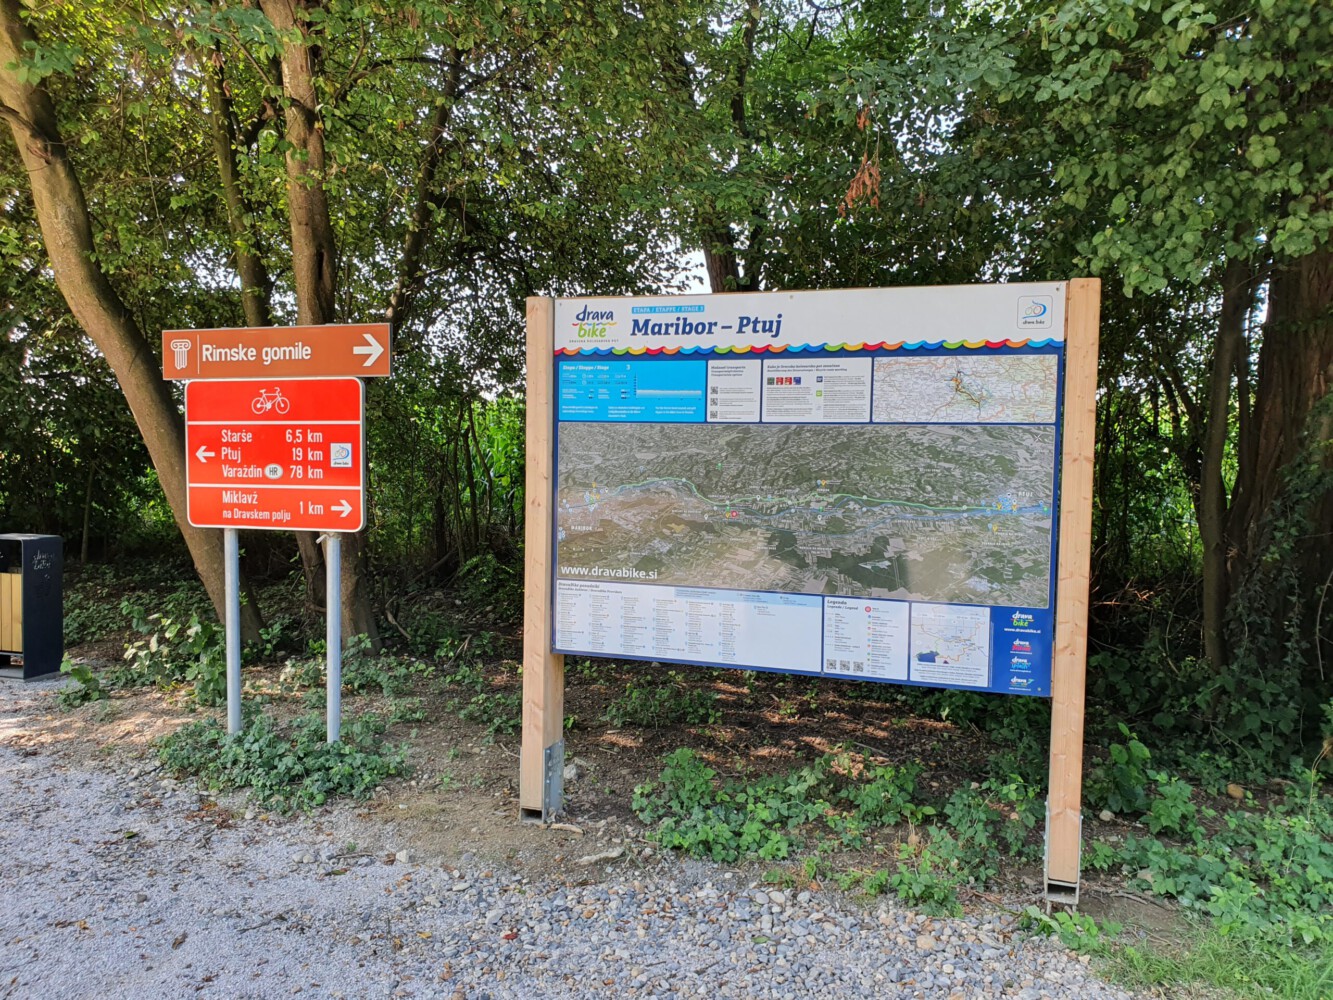 Drava bike path sign with lots of information -well done!